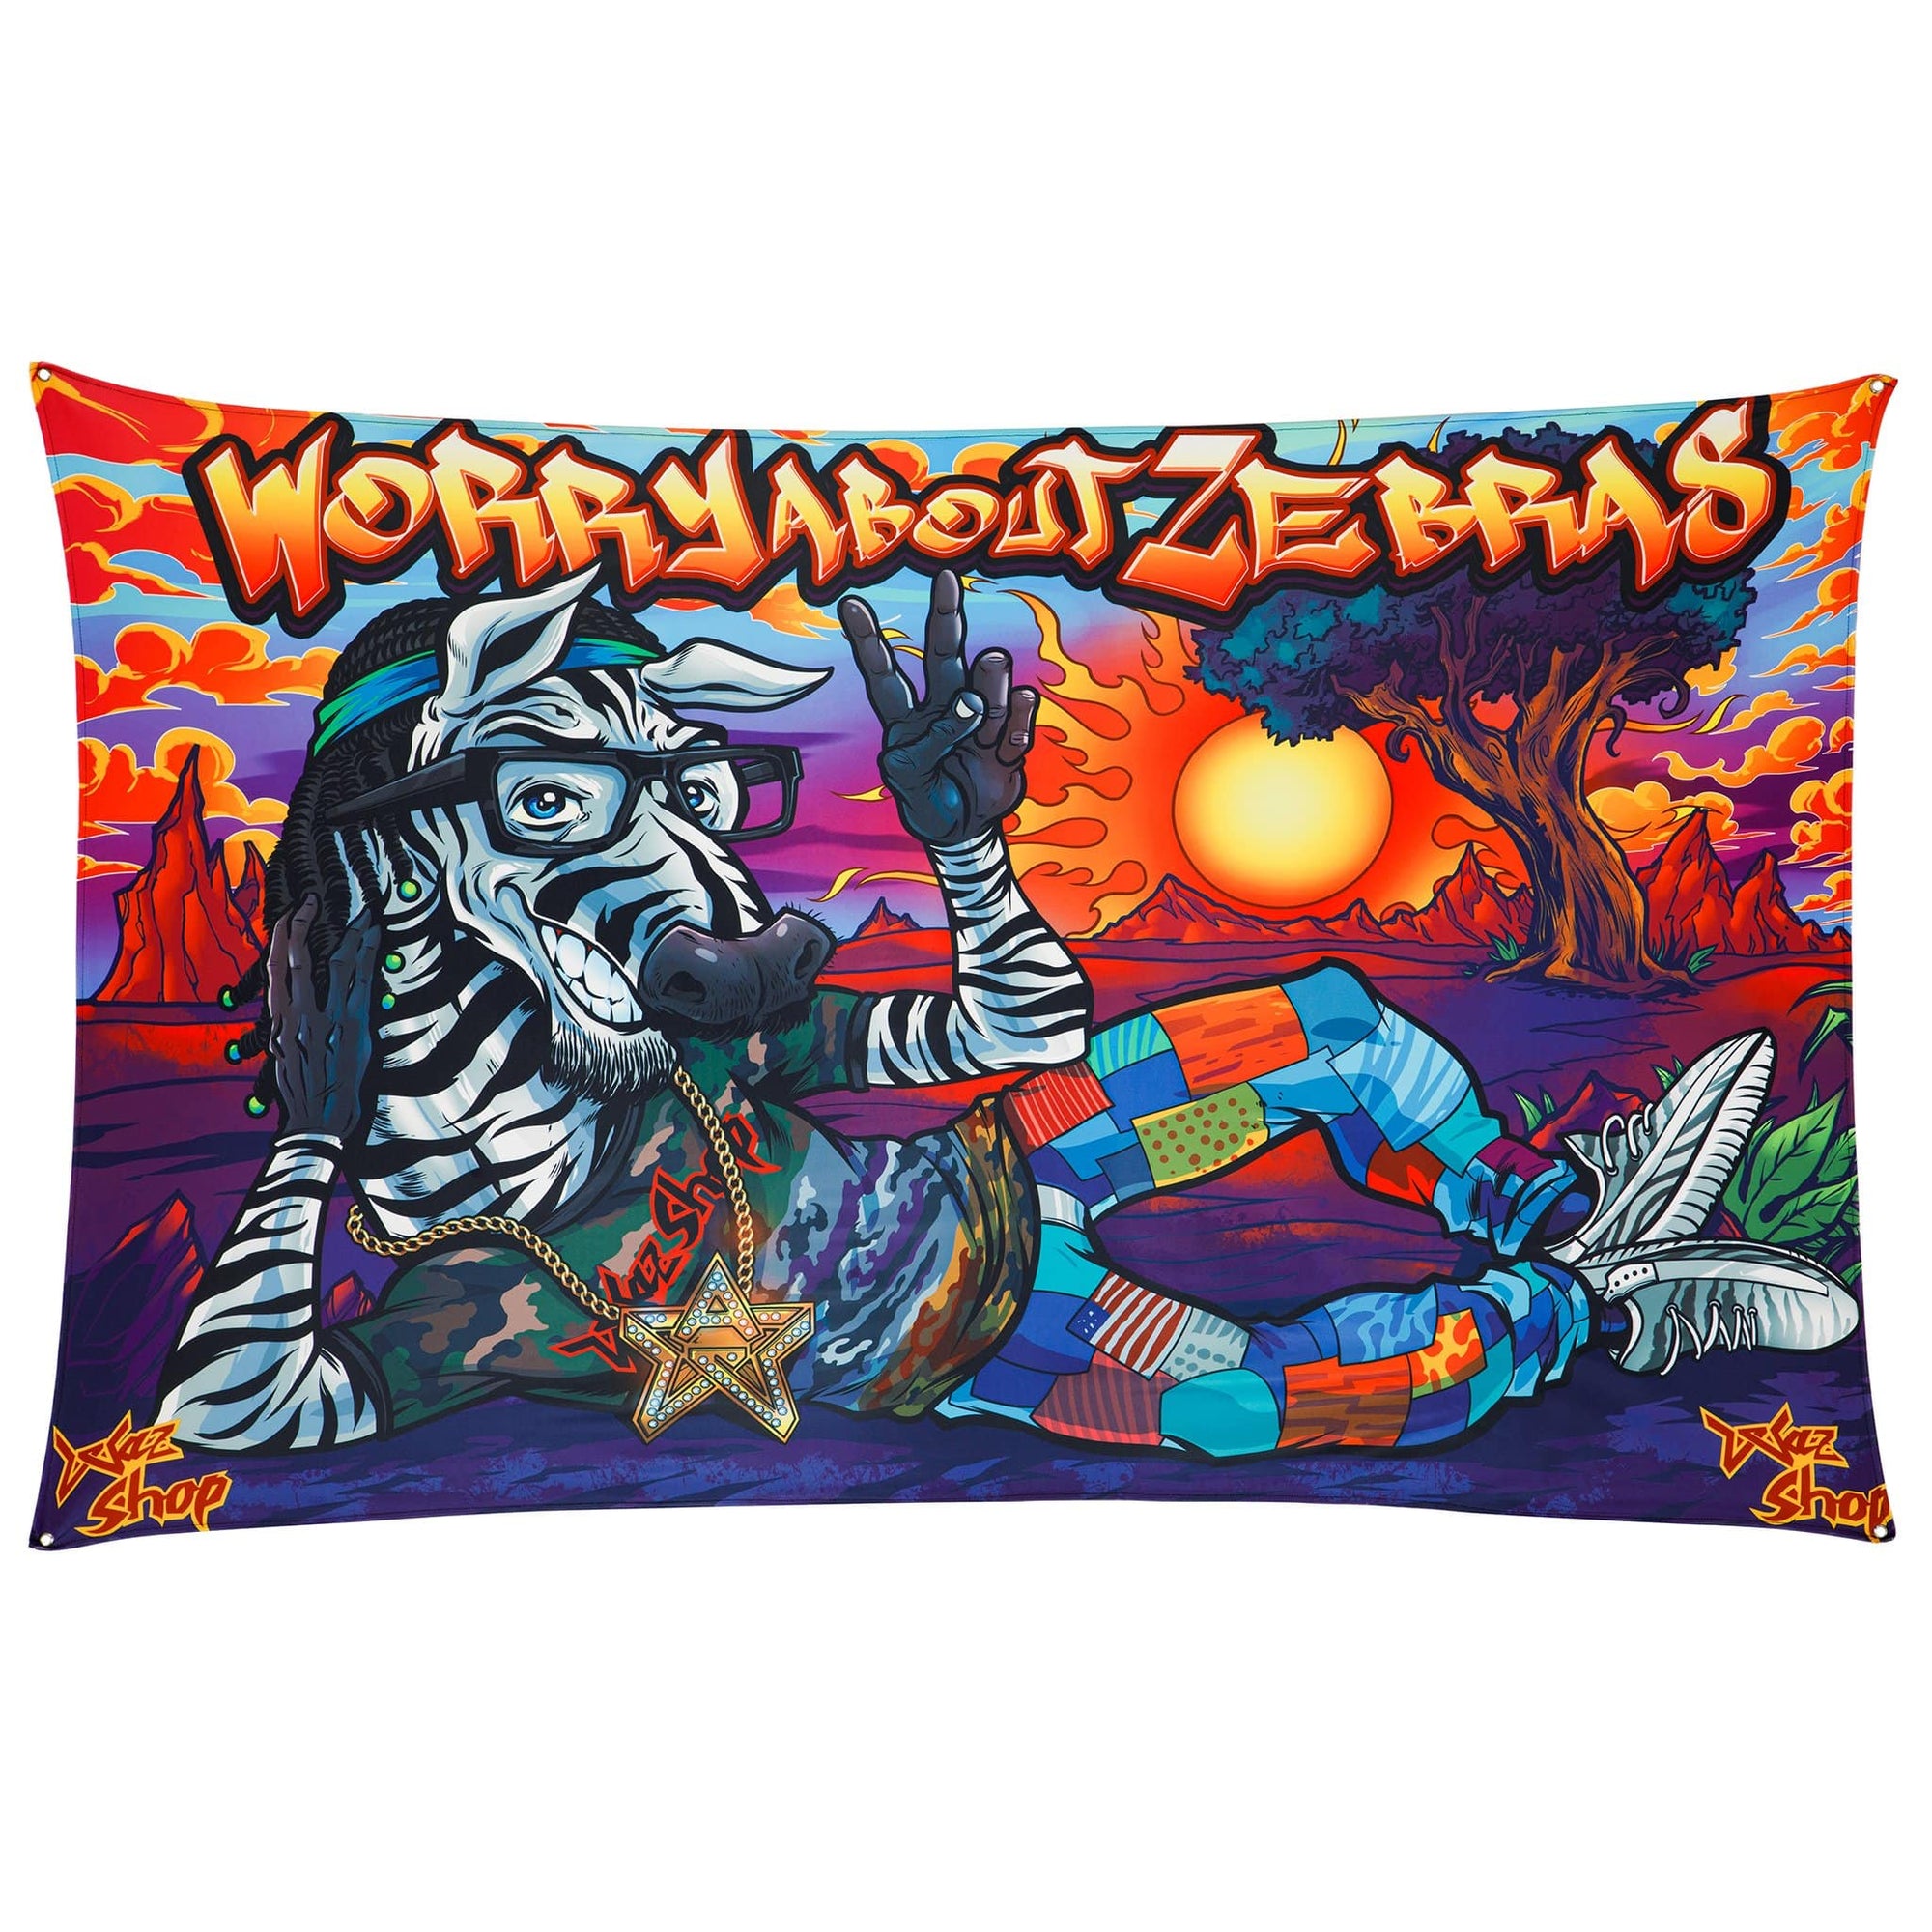 Worry About Zebras Tapestry